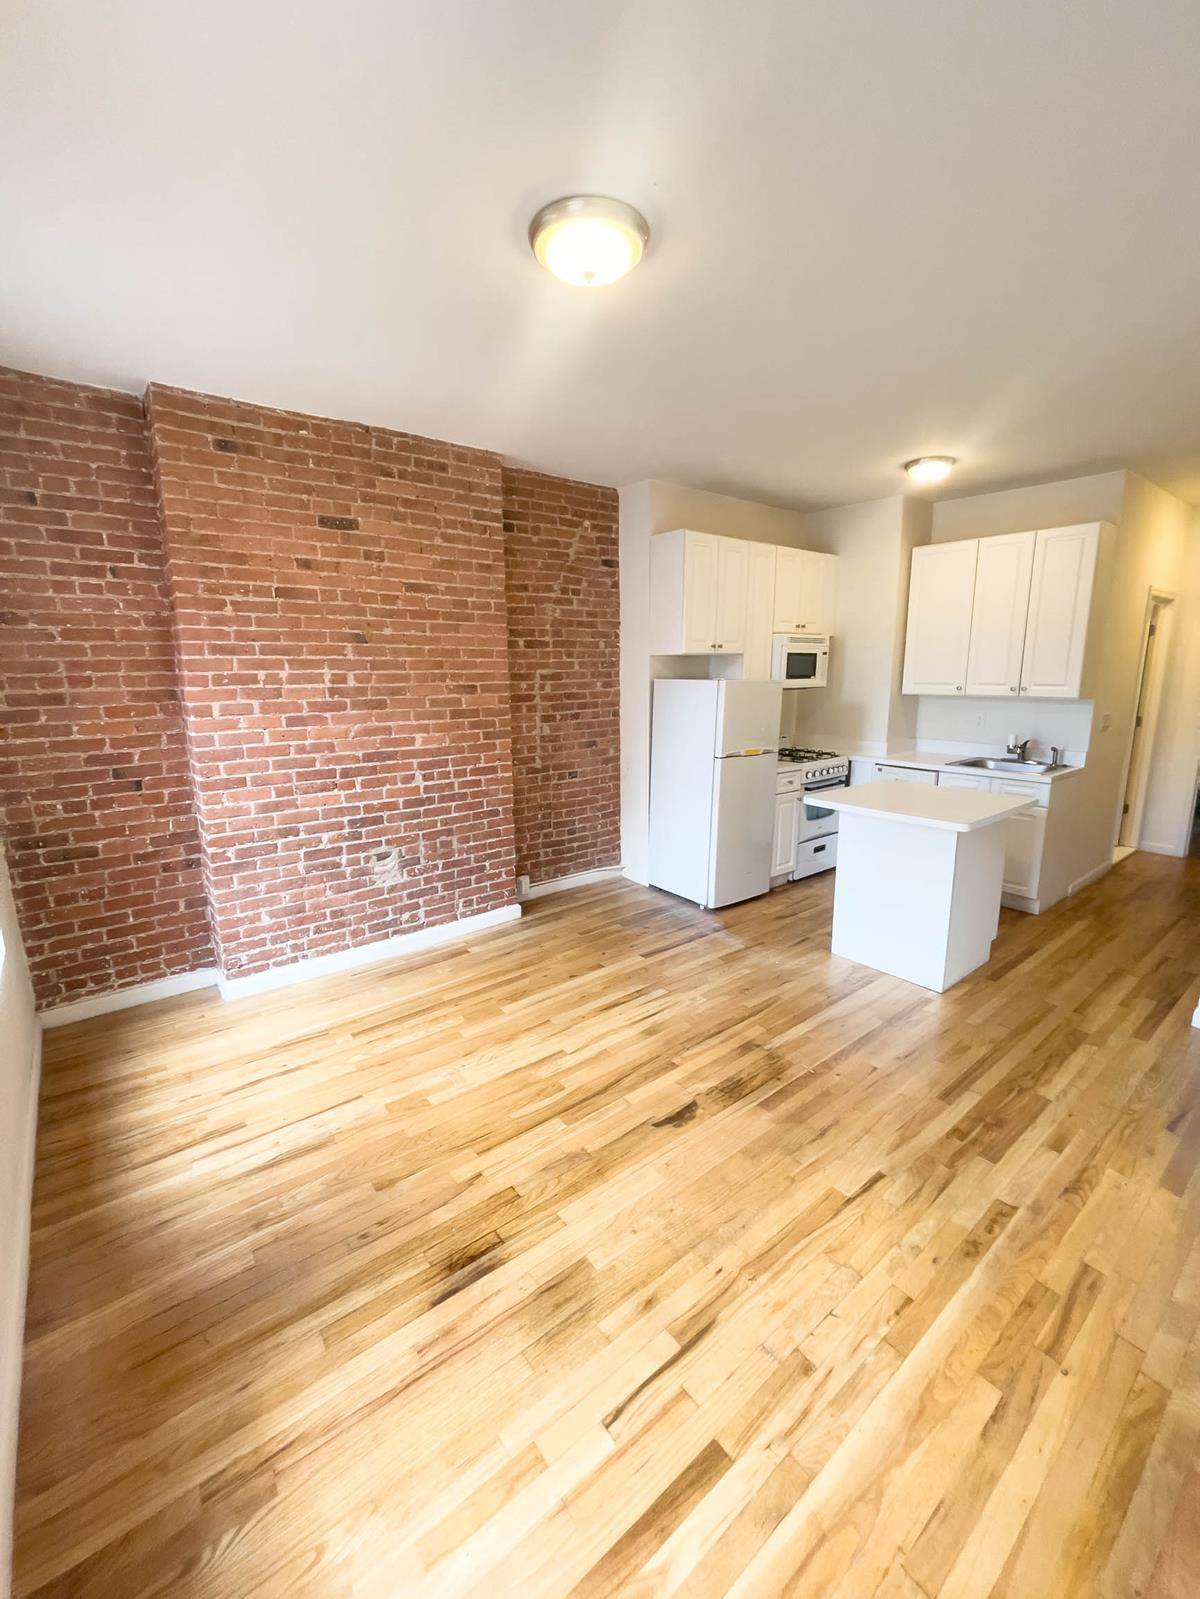 Renovated 1Br in Historic West Village with great light, hardwood floors, high ceilings, exposed brick.